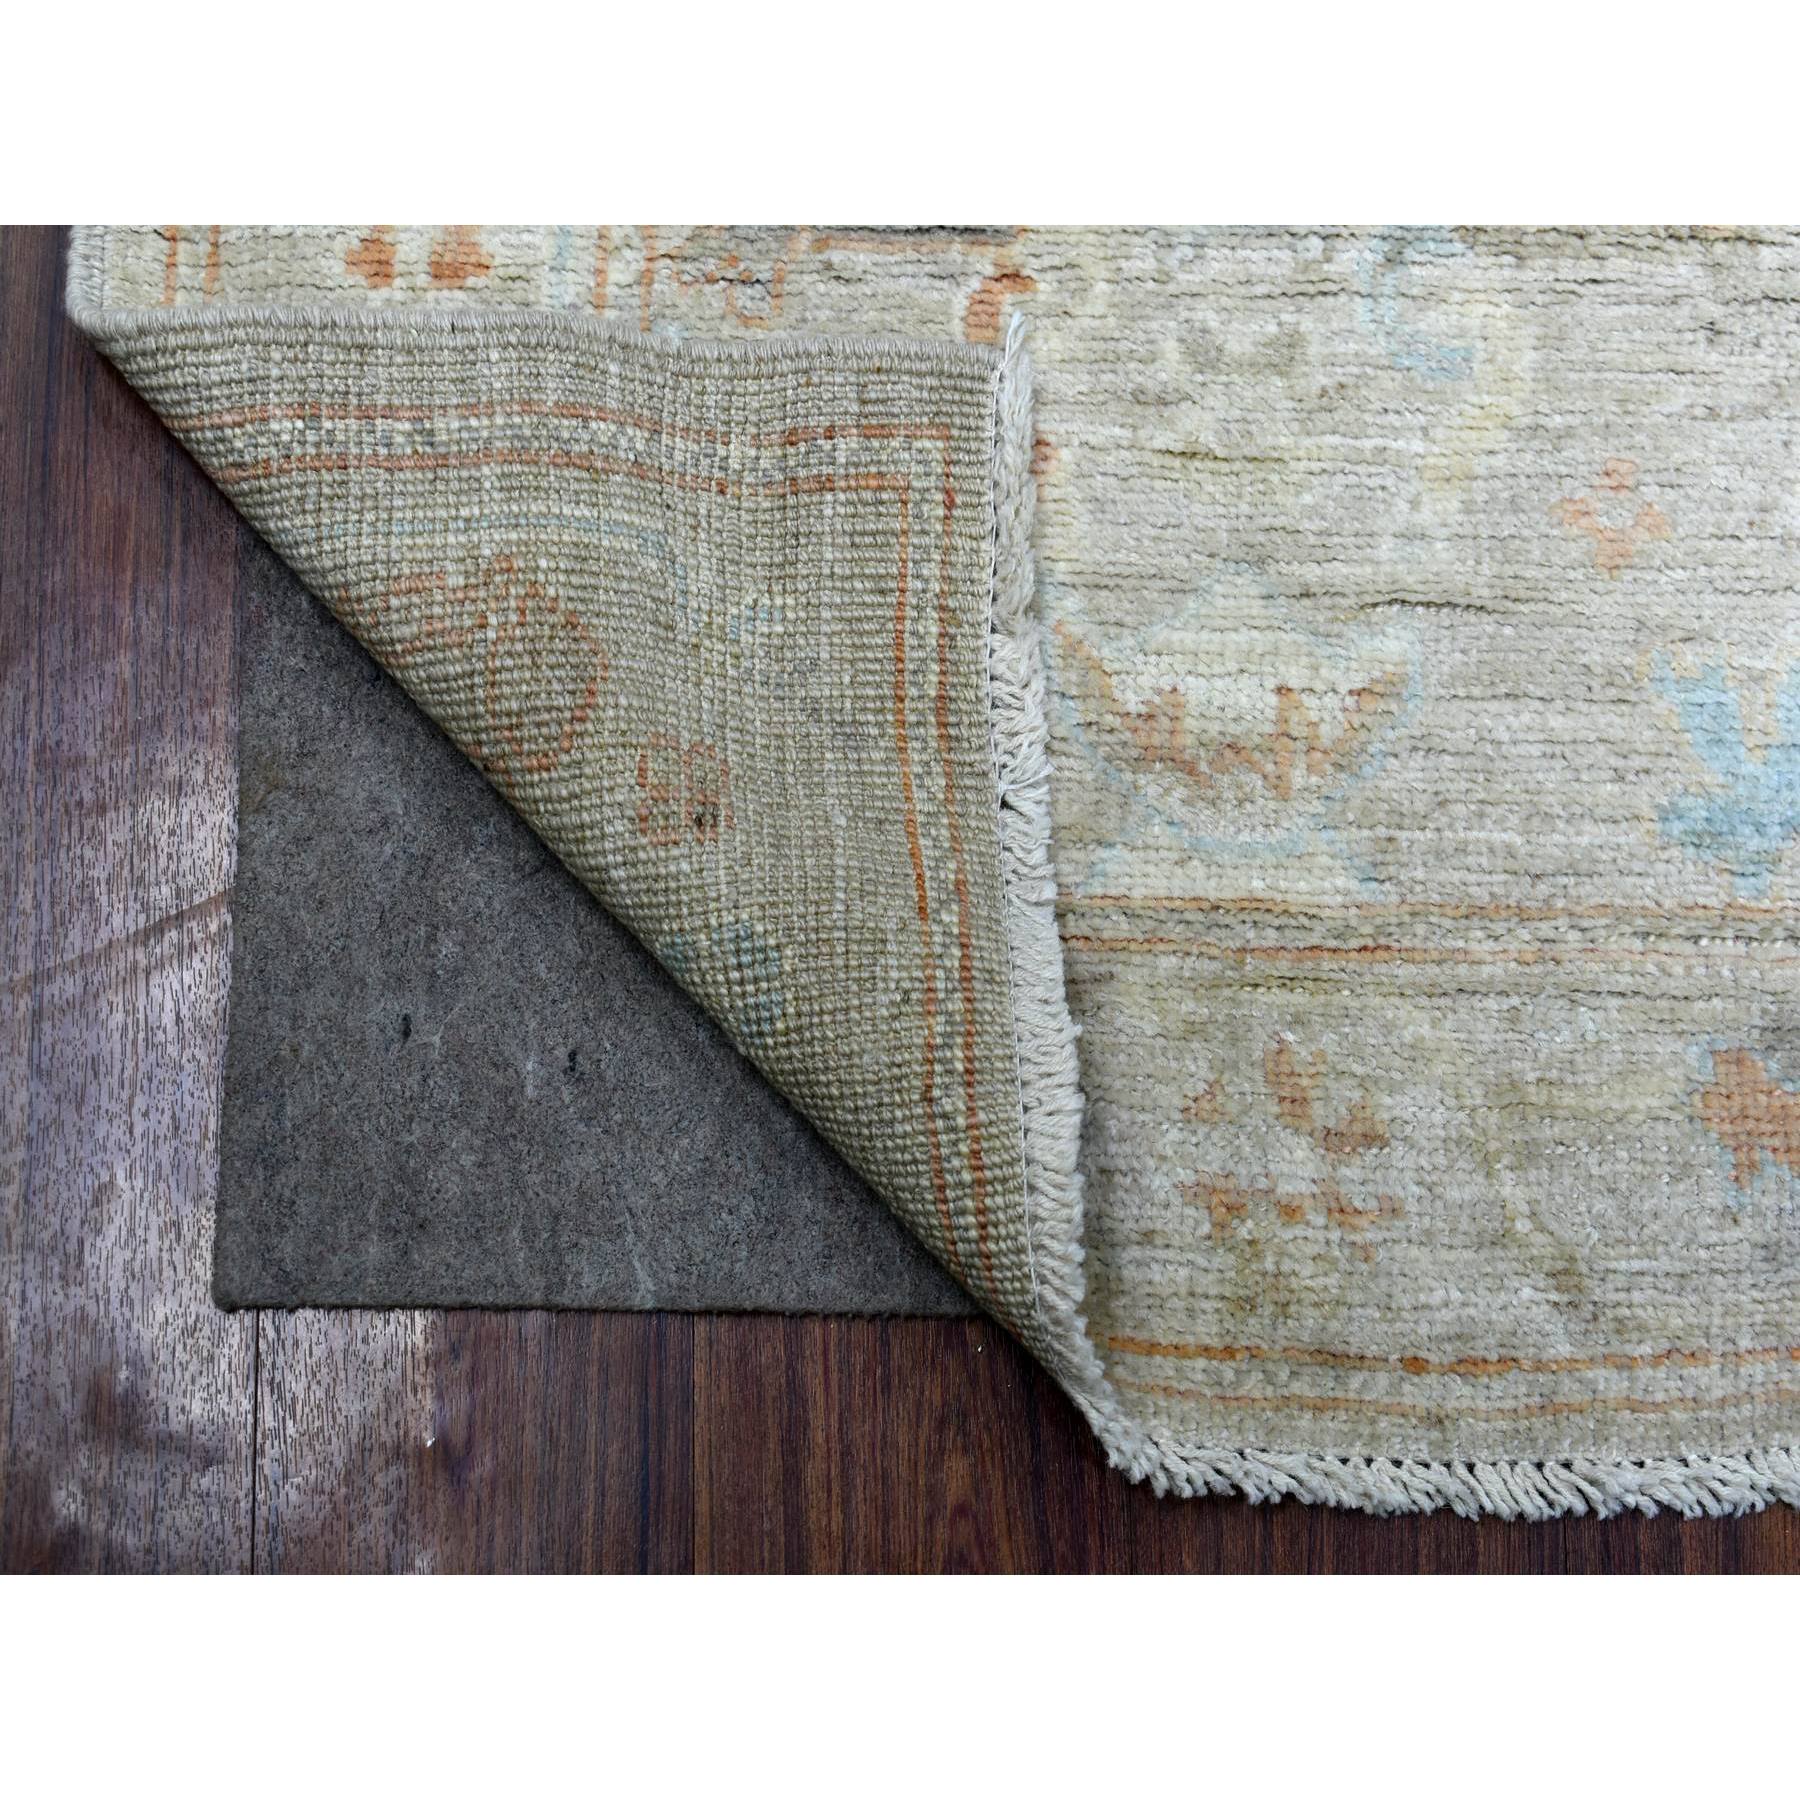 2'9"x9'7" Beige Hand Woven with Afghan Angora Oushak Faded Out Color Shades Soft, Velvety Wool Oriental Runner Rug 